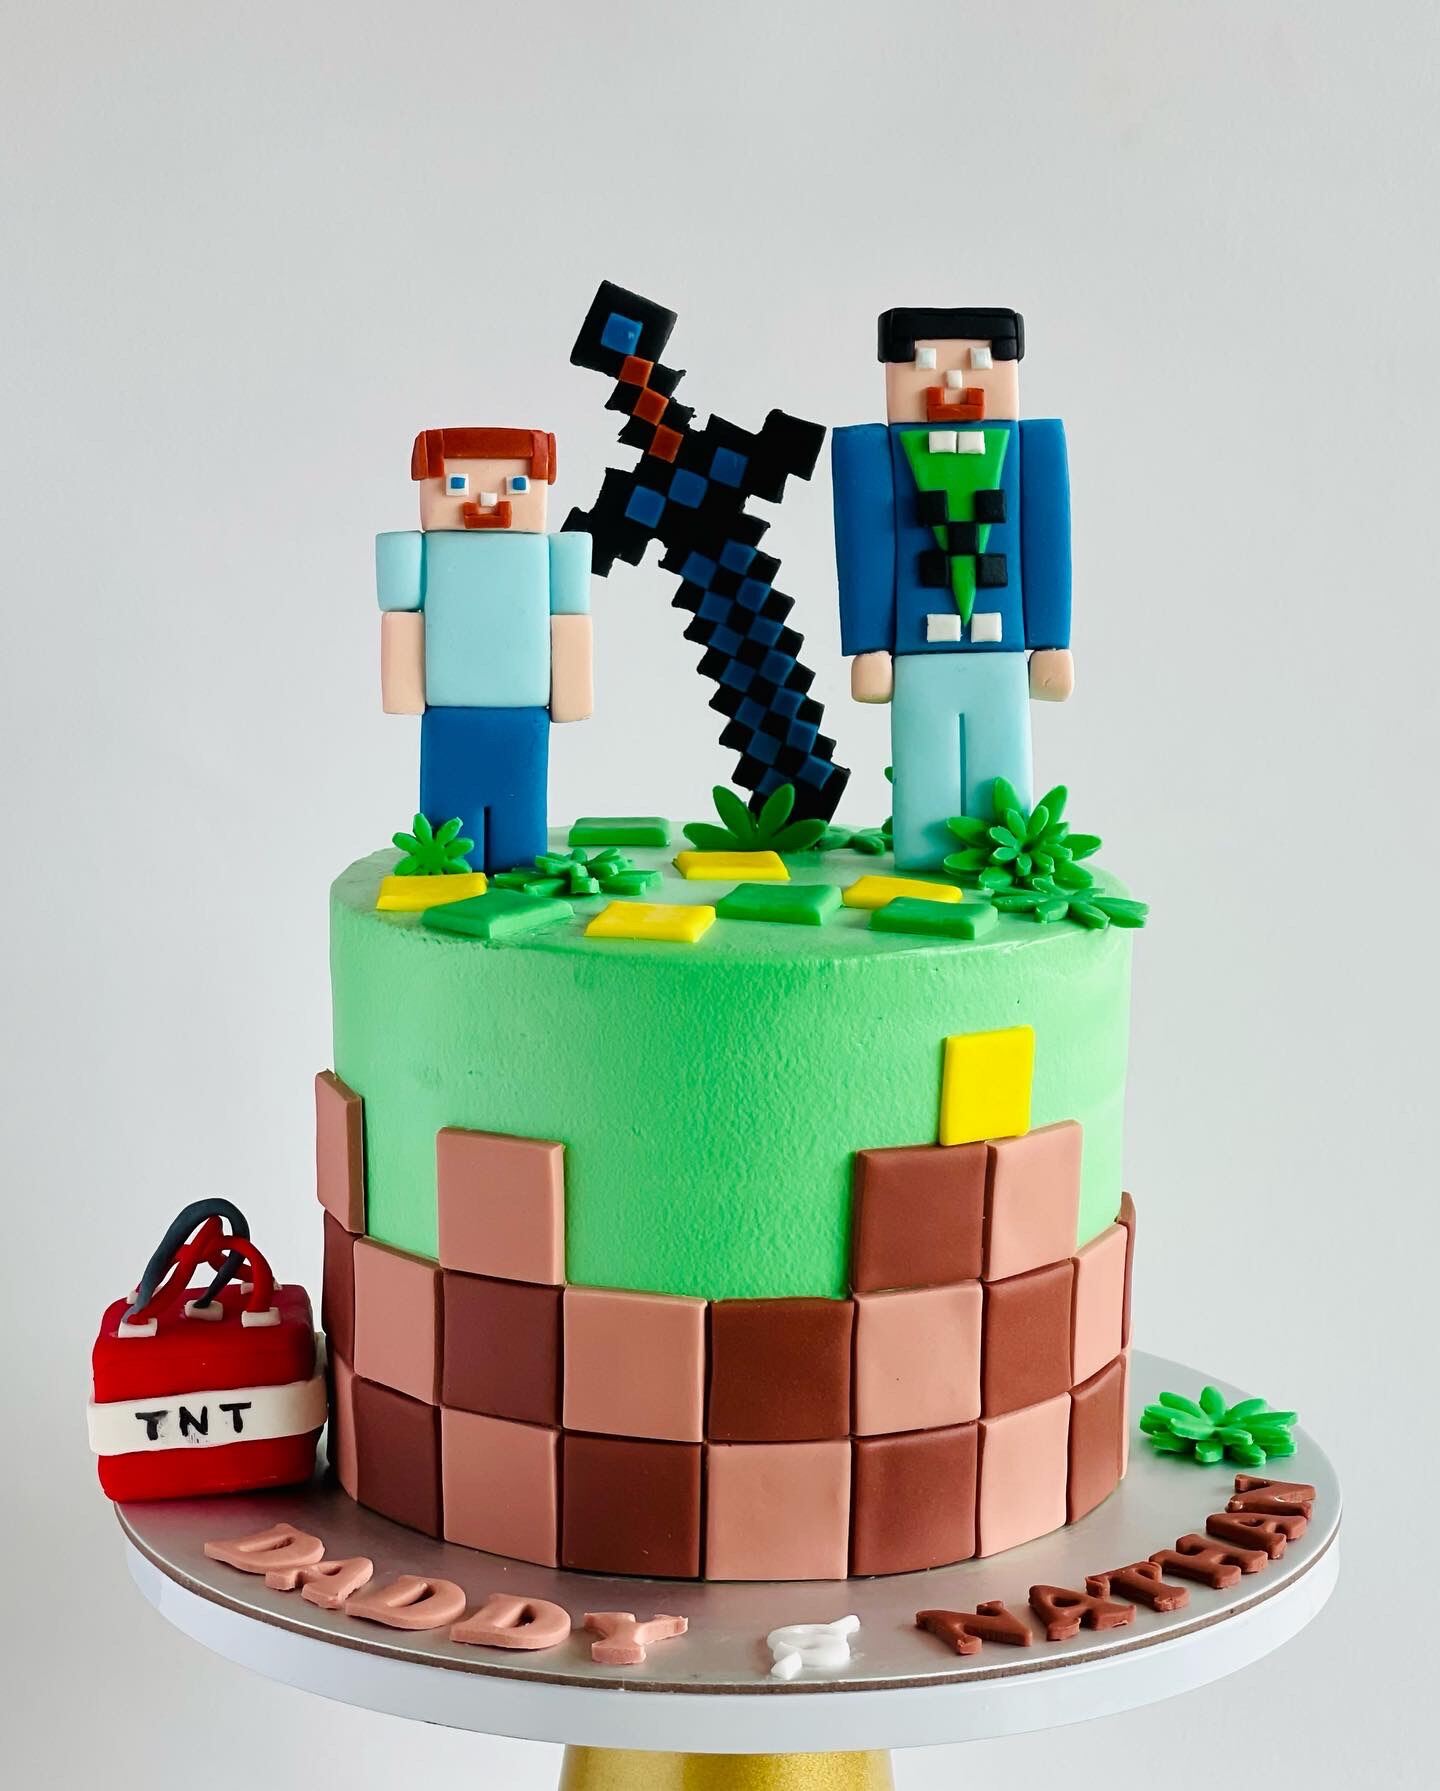 Homebaker - Steve and Alex from Minecraft went to Kurseong... | Facebook